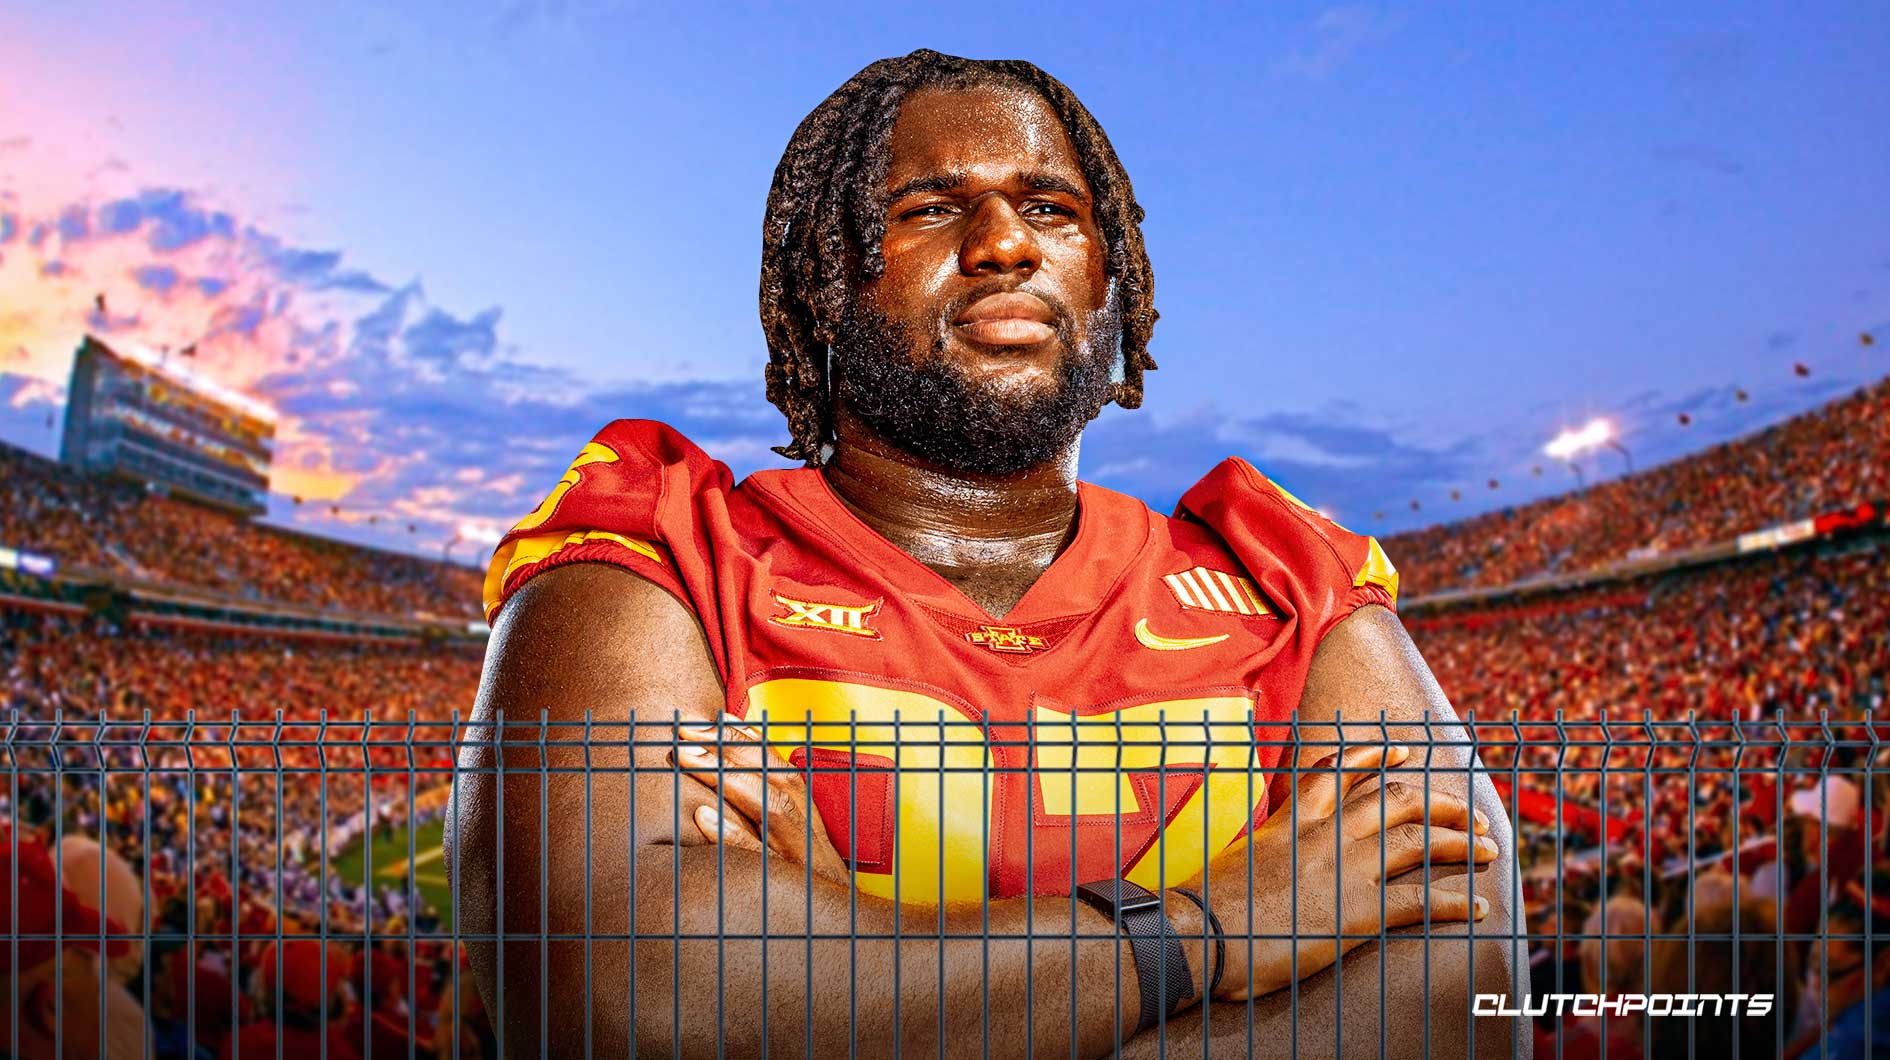 Iowa State football player involved in gambling investigation leaves